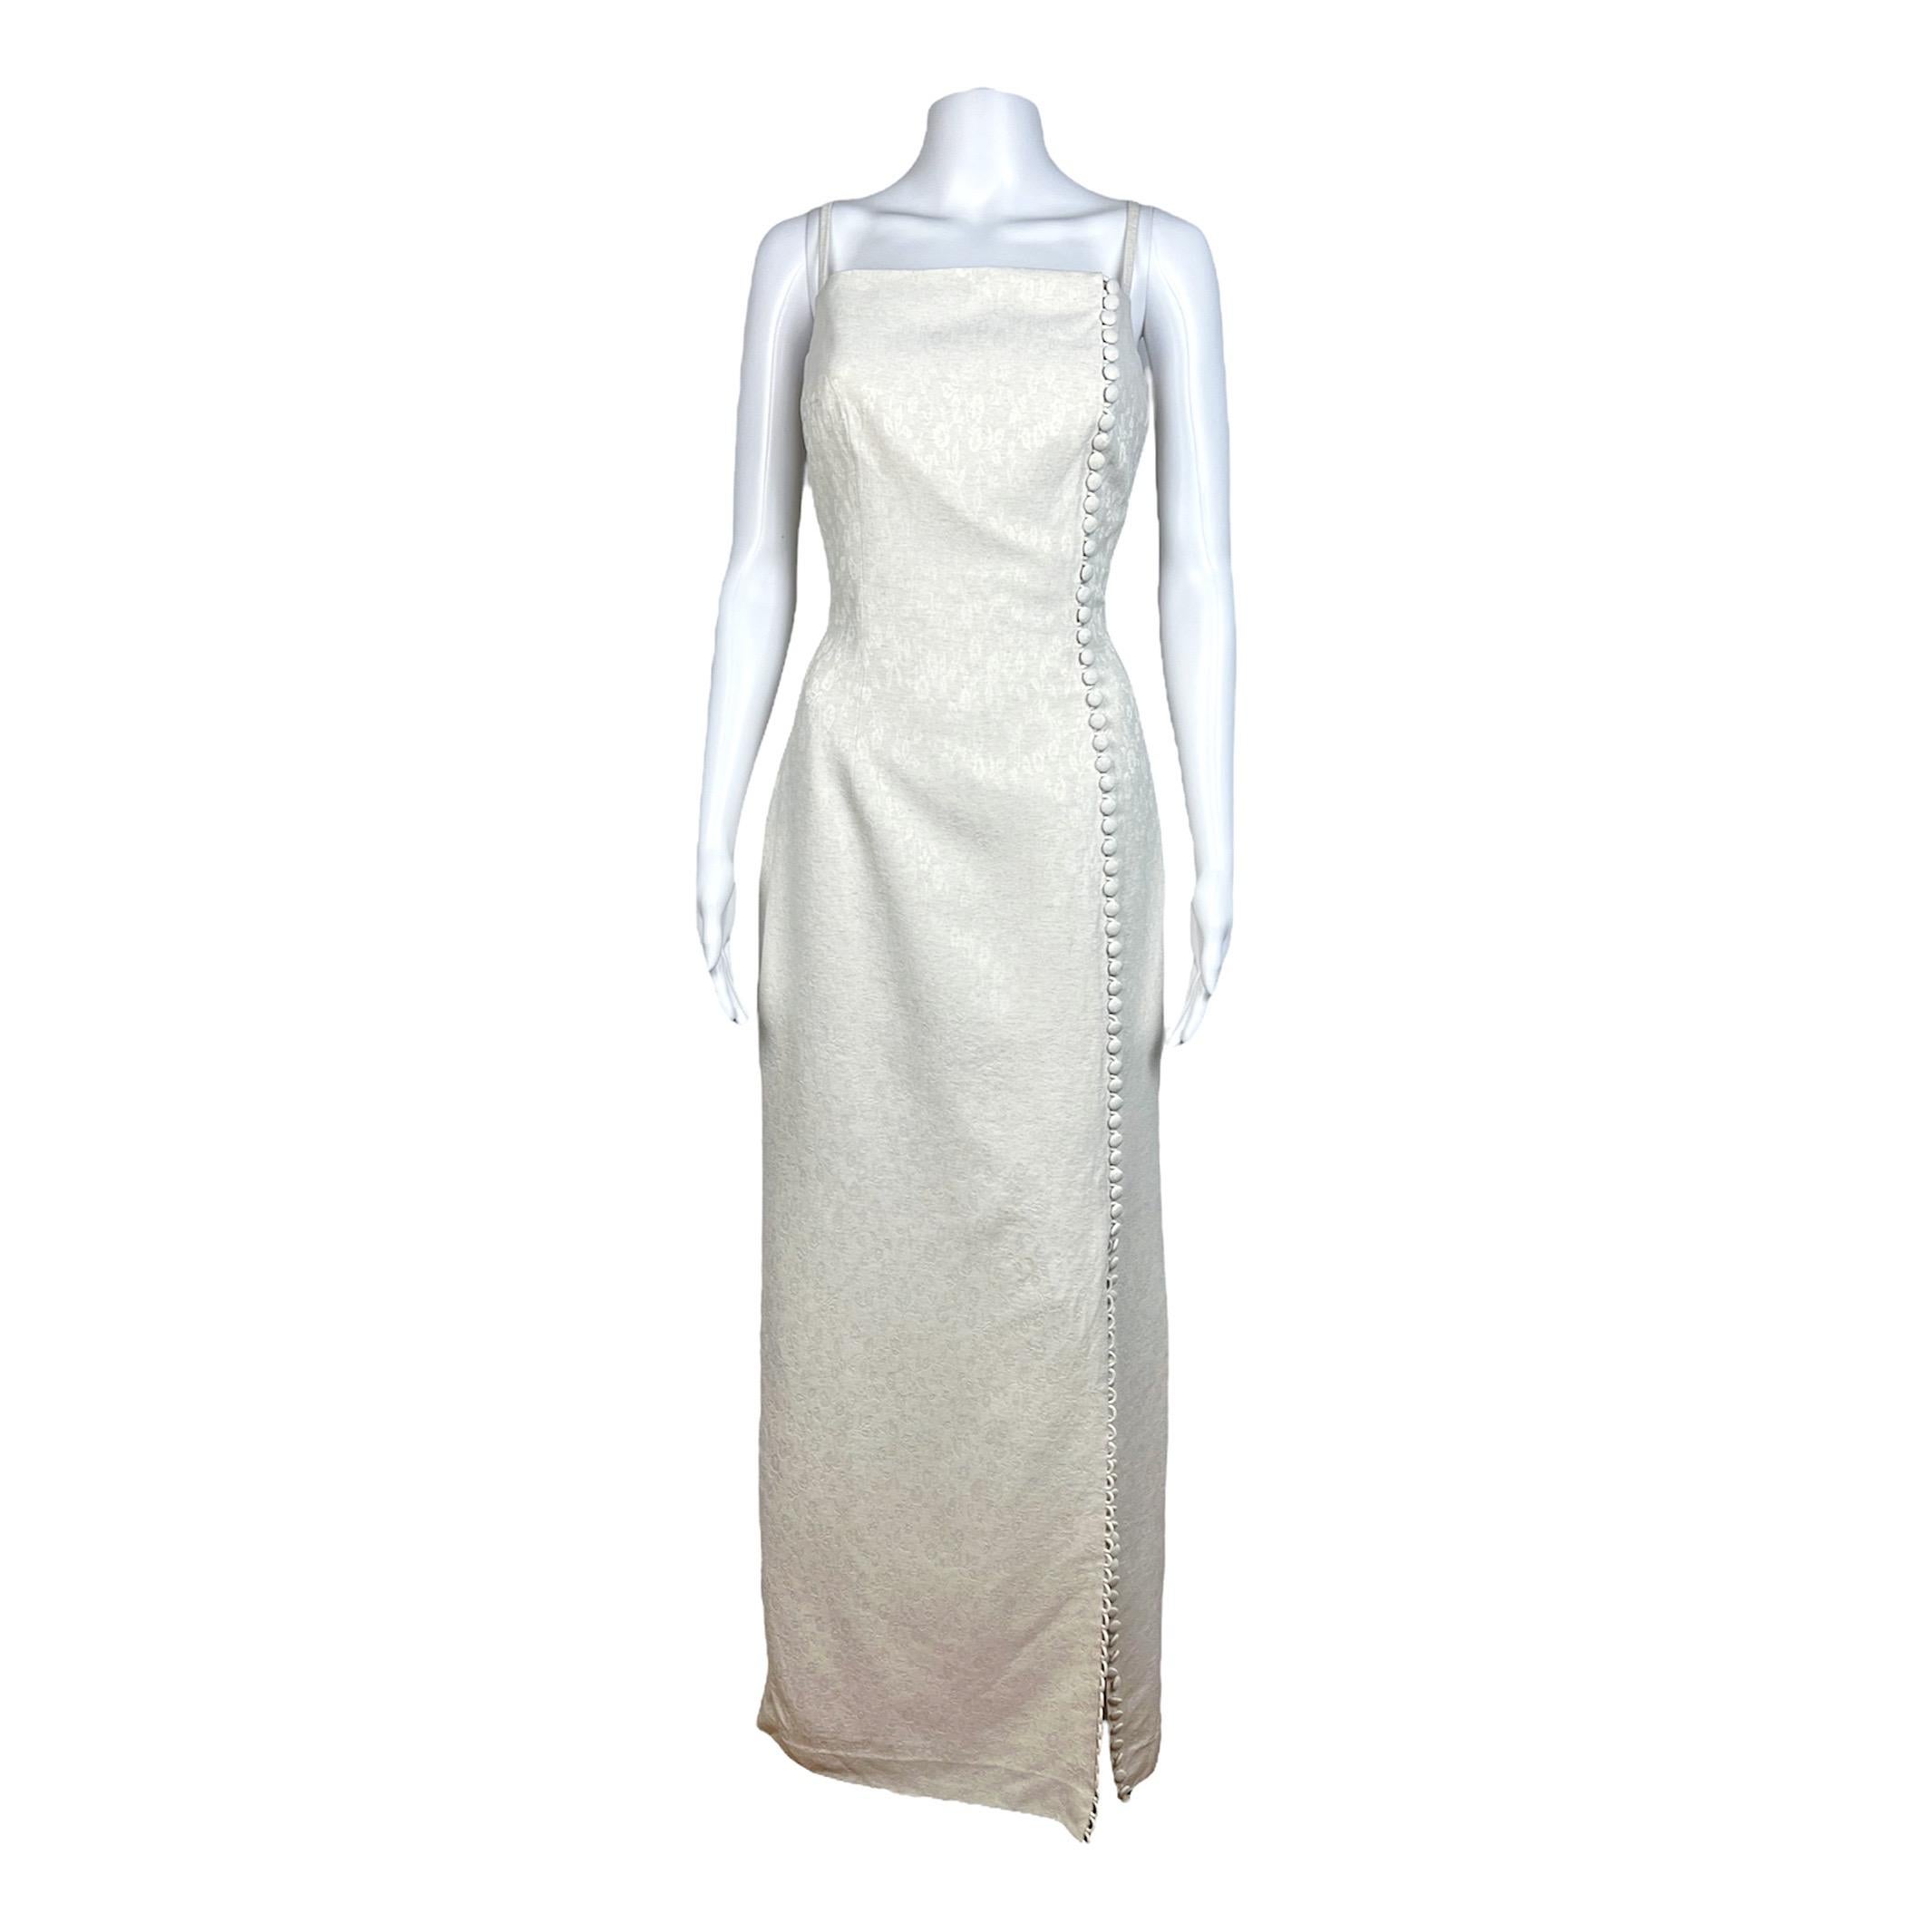 Exquisite and timeless, this stunning Valentino white gown from the early 90s features a delicate jacquard floral motif, complemented by covered buttons and a tasteful slit. Its elegance makes it the ideal choice for a rehearsal dinner. The buttons